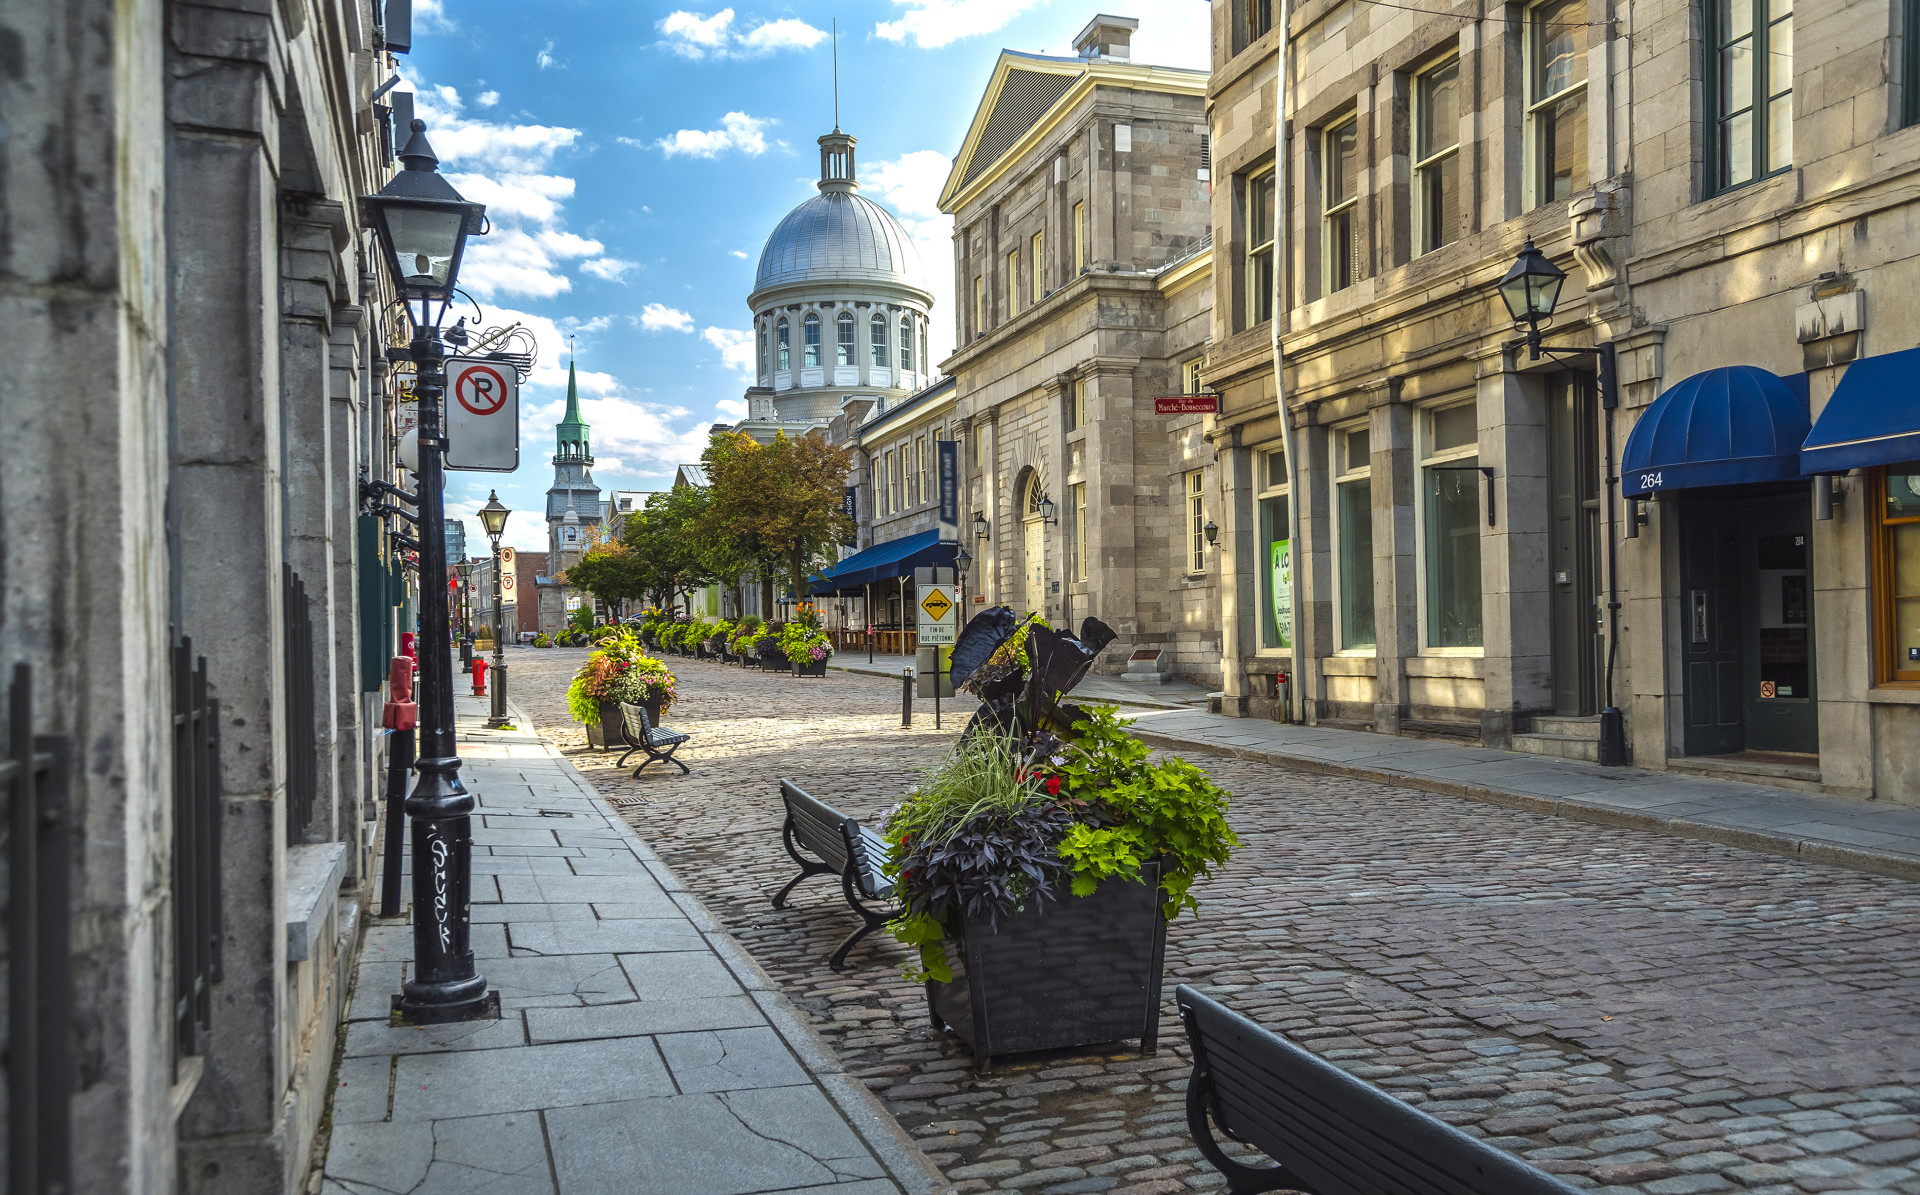 But we're starting in Montreal. Stroll cobblestone paths in Old Montreal and indulge in Quebecois cuisine before heading out with a happy belly on your first leg of the journey.<p>You may also like:<a href="https://www.starsinsider.com/n/325683?utm_source=msn.com&utm_medium=display&utm_campaign=referral_description&utm_content=384585v6en-us"> This glacial lake hides a dark secret</a></p>